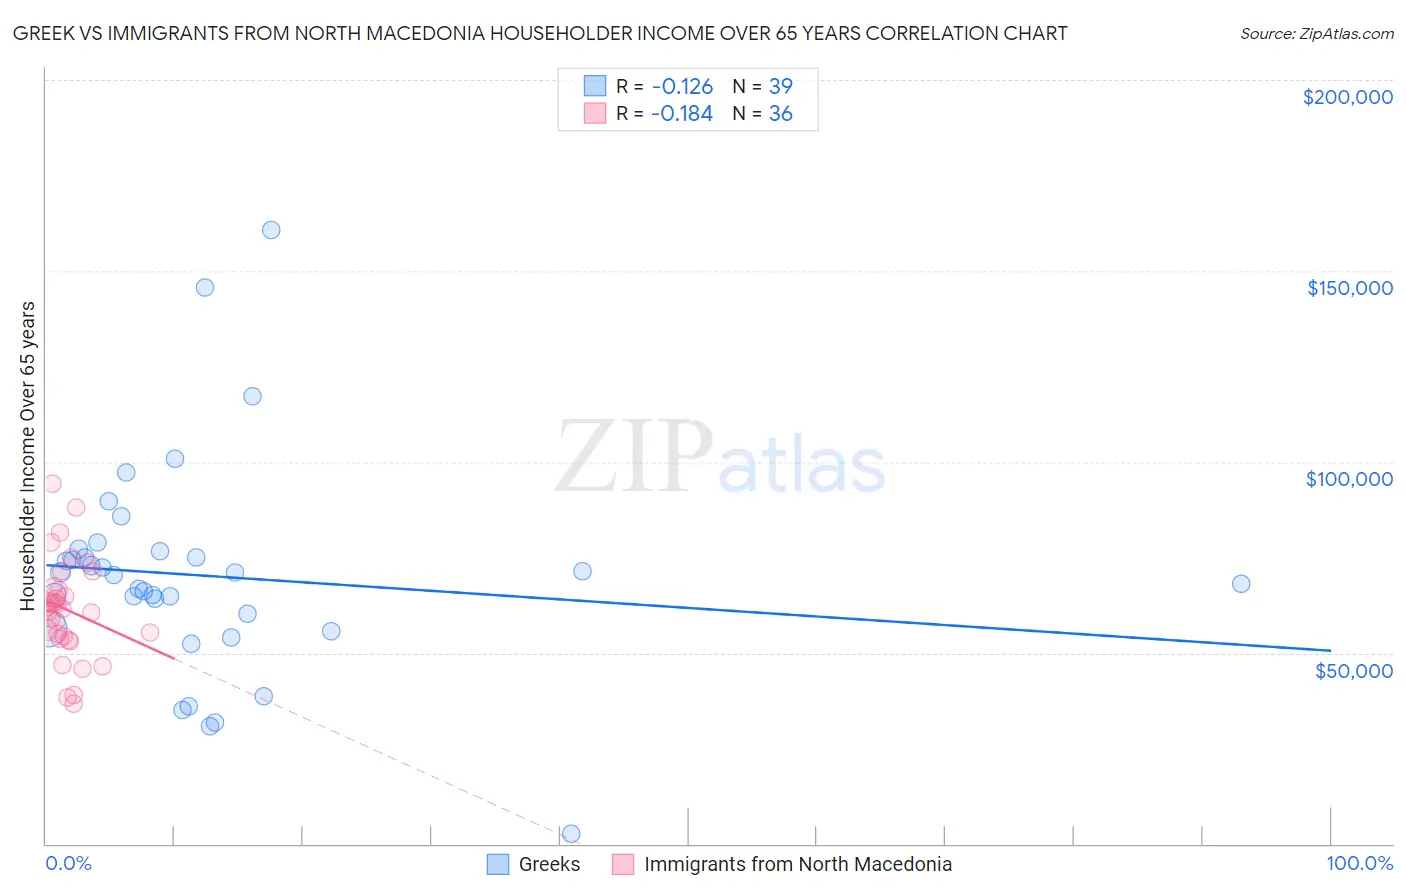 Greek vs Immigrants from North Macedonia Householder Income Over 65 years